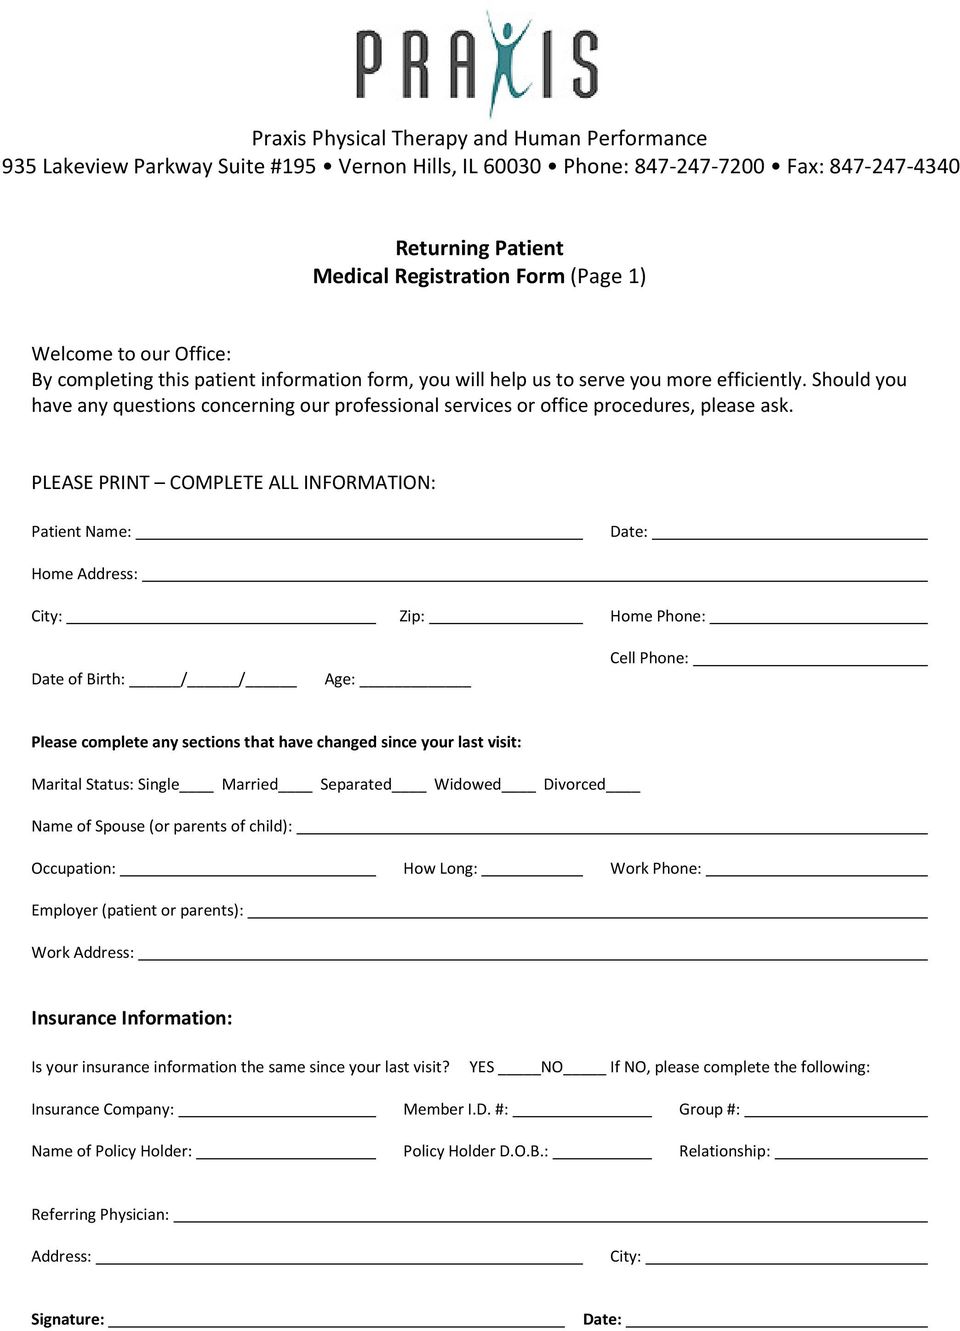 PLEASE PRINT COMPLETE ALL INFORMATION: Patient Name: Home Address: City: Zip: Home Phone: Date of Birth: / / Age: Cell Phone: Please complete any sections that have changed since your last visit: